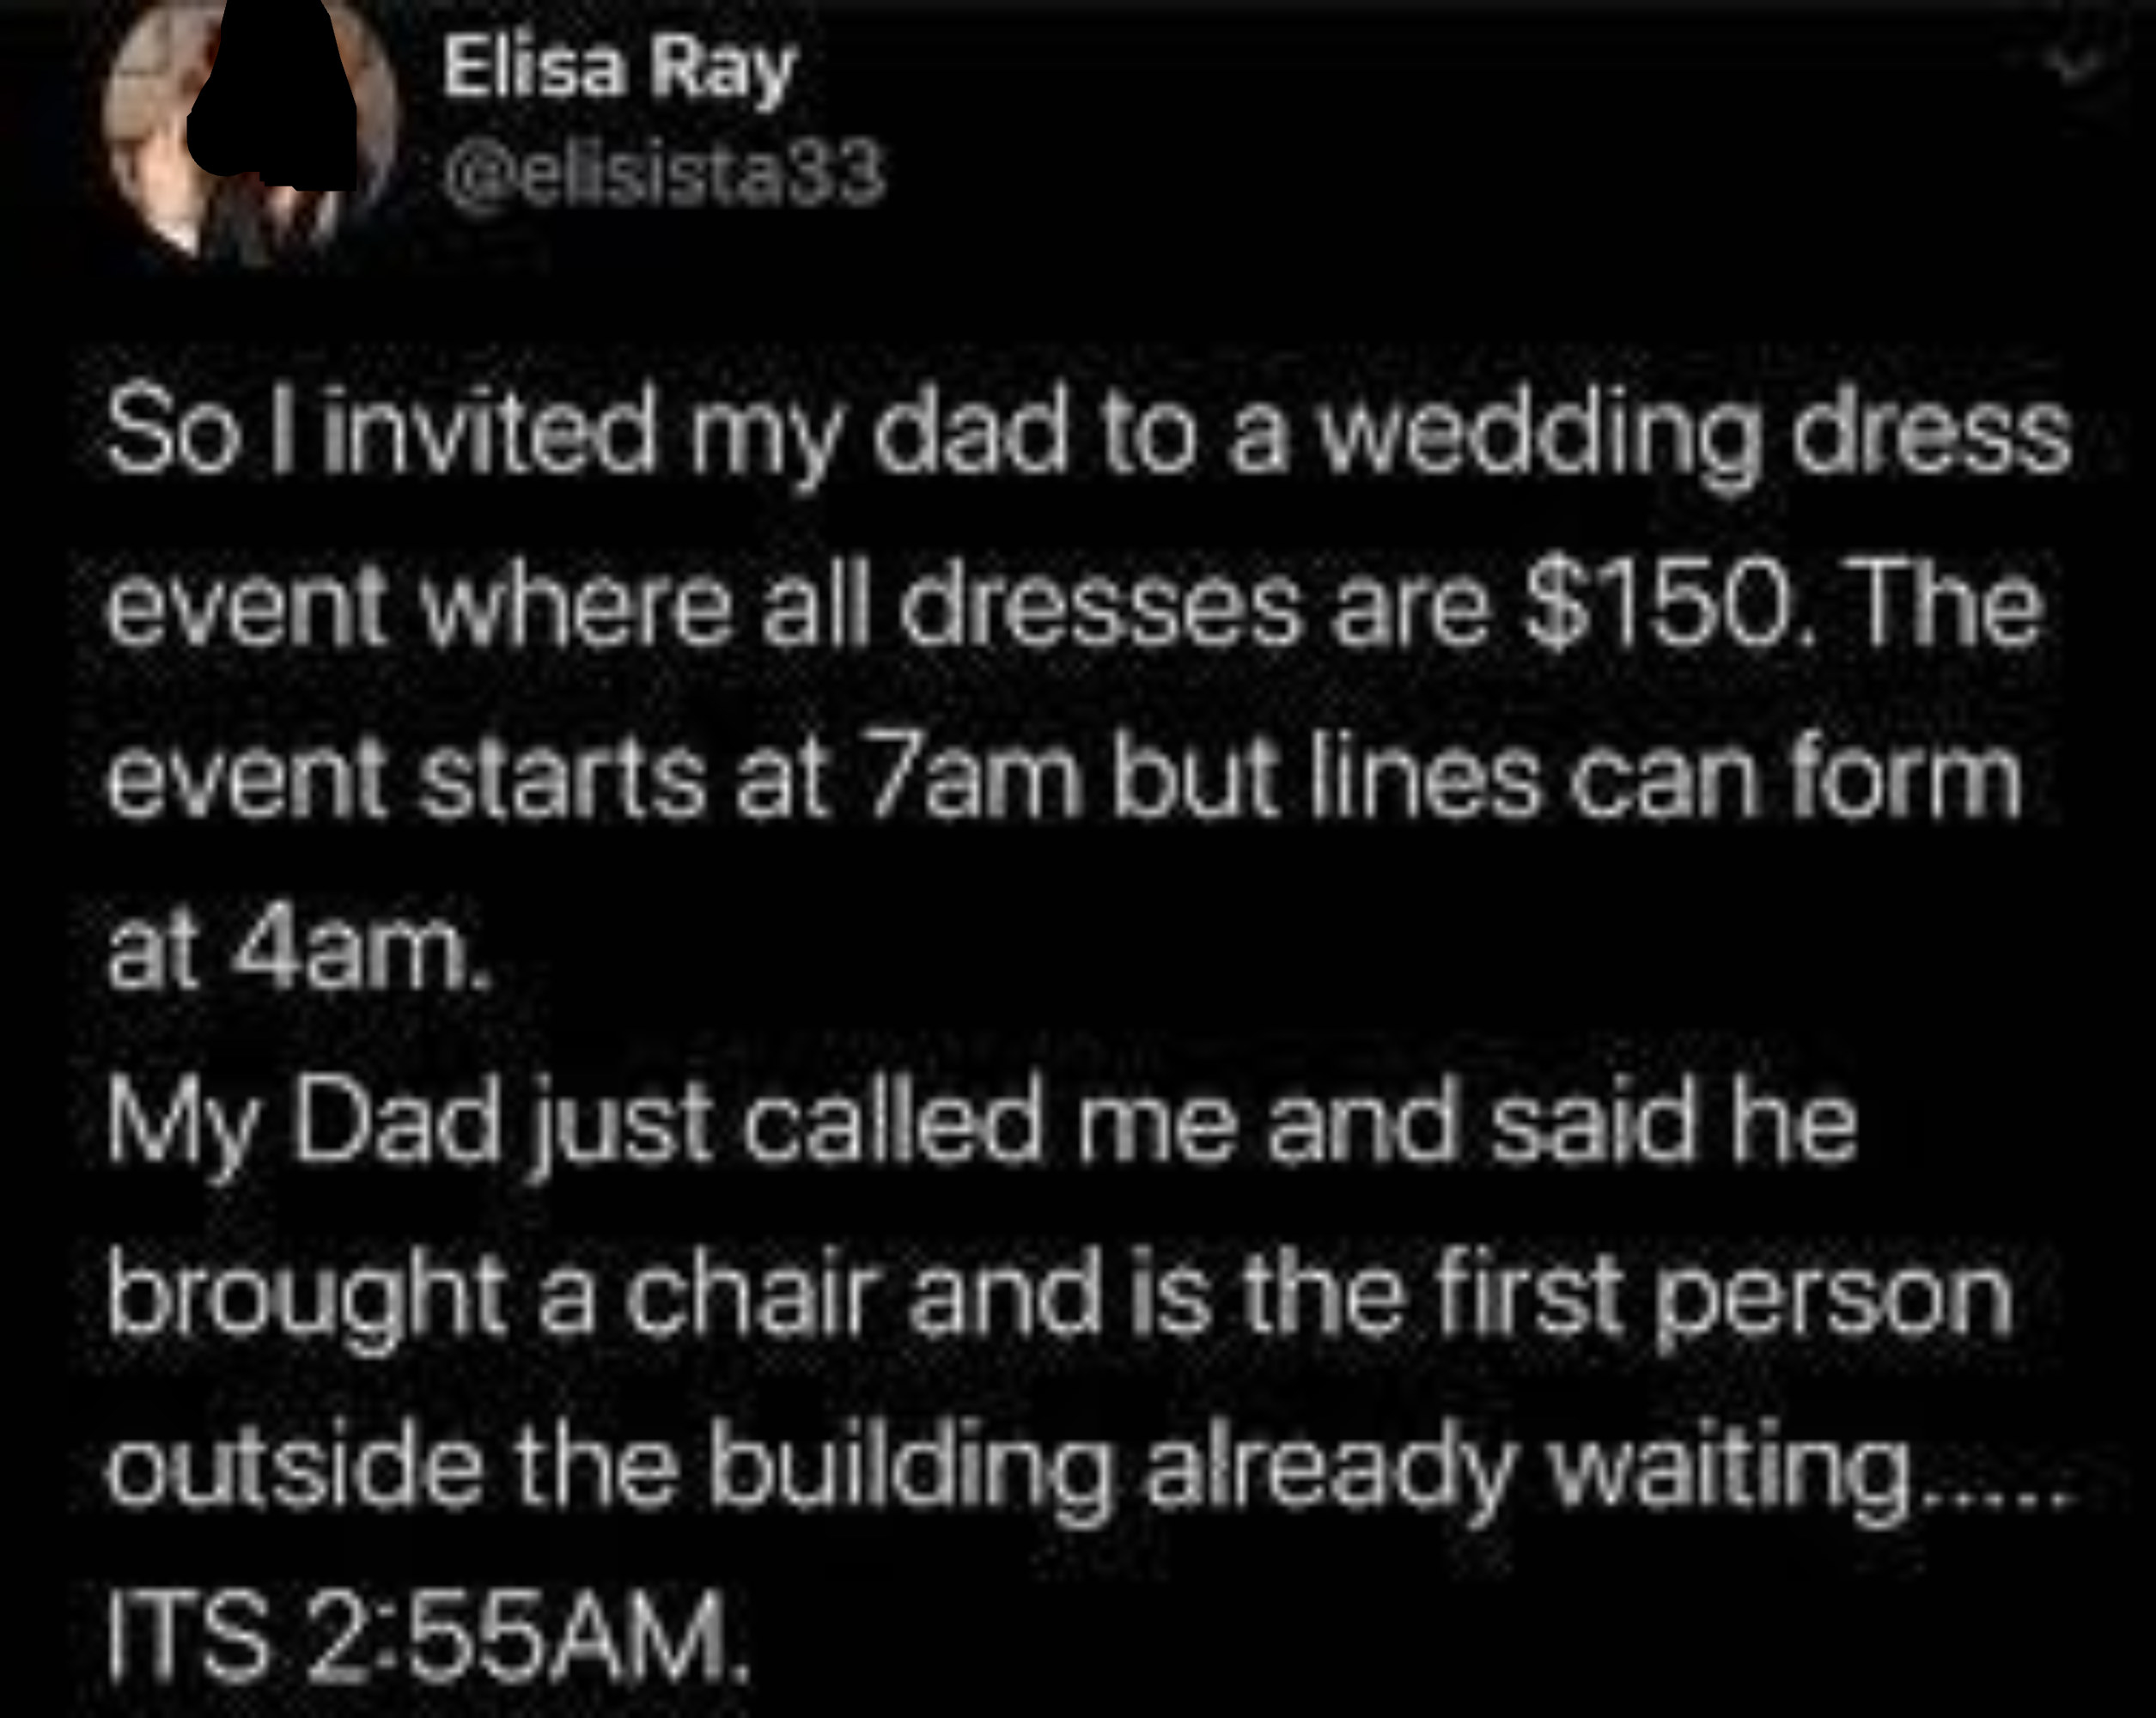 Bride-to-be&#x27;s dad shows up for them at a wedding dress event that starts at 7 am and where all dresses are $150 by being the first in line at 2:55 am